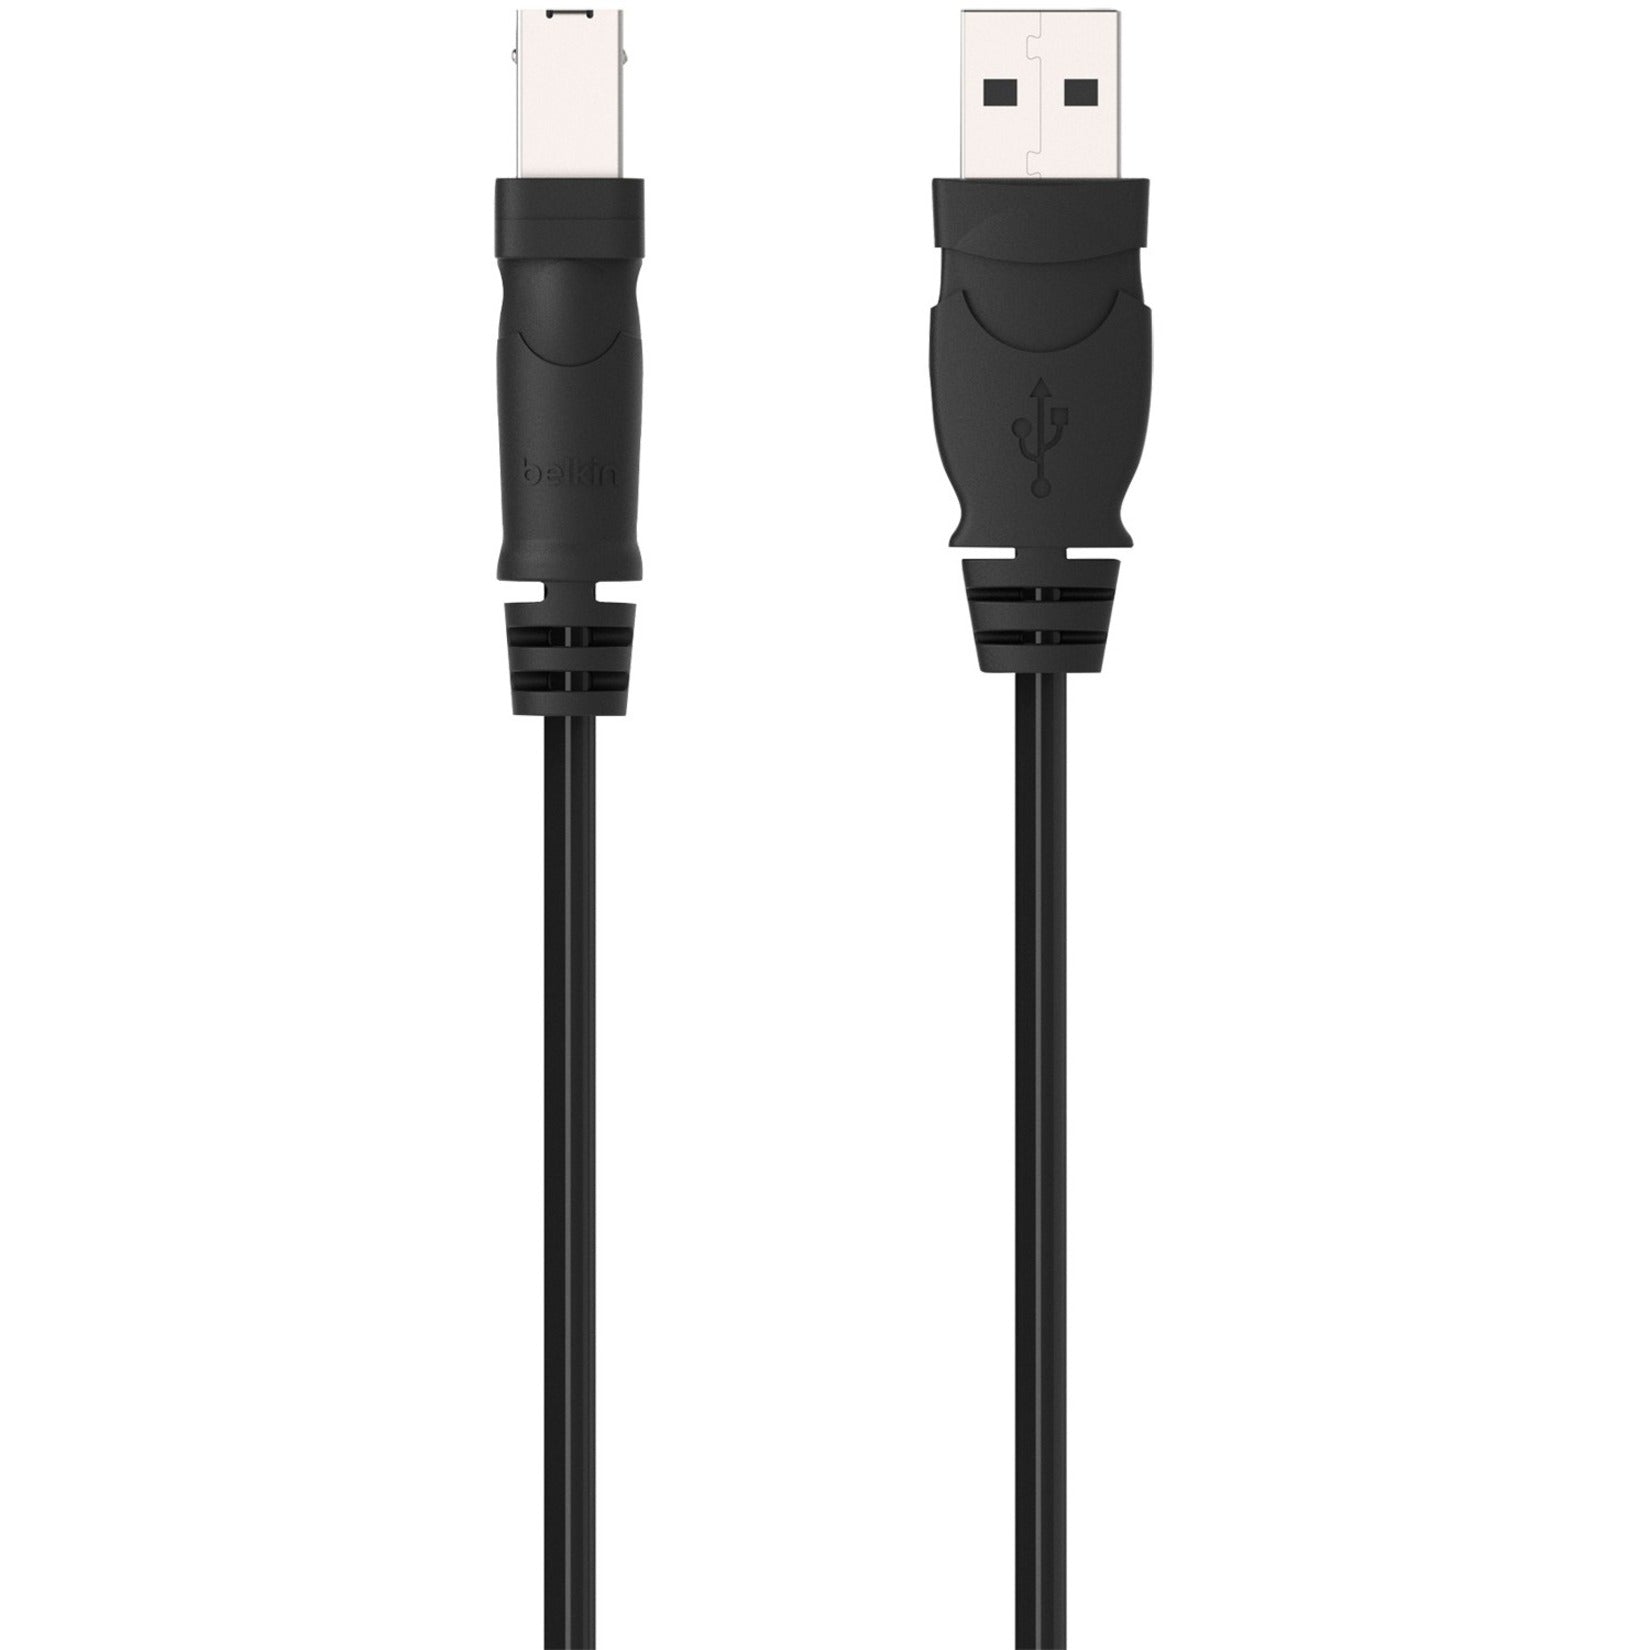 Belkin F3U133B06 Hi-Speed USB 2.0 Cable, 6 ft Data Transfer Cable